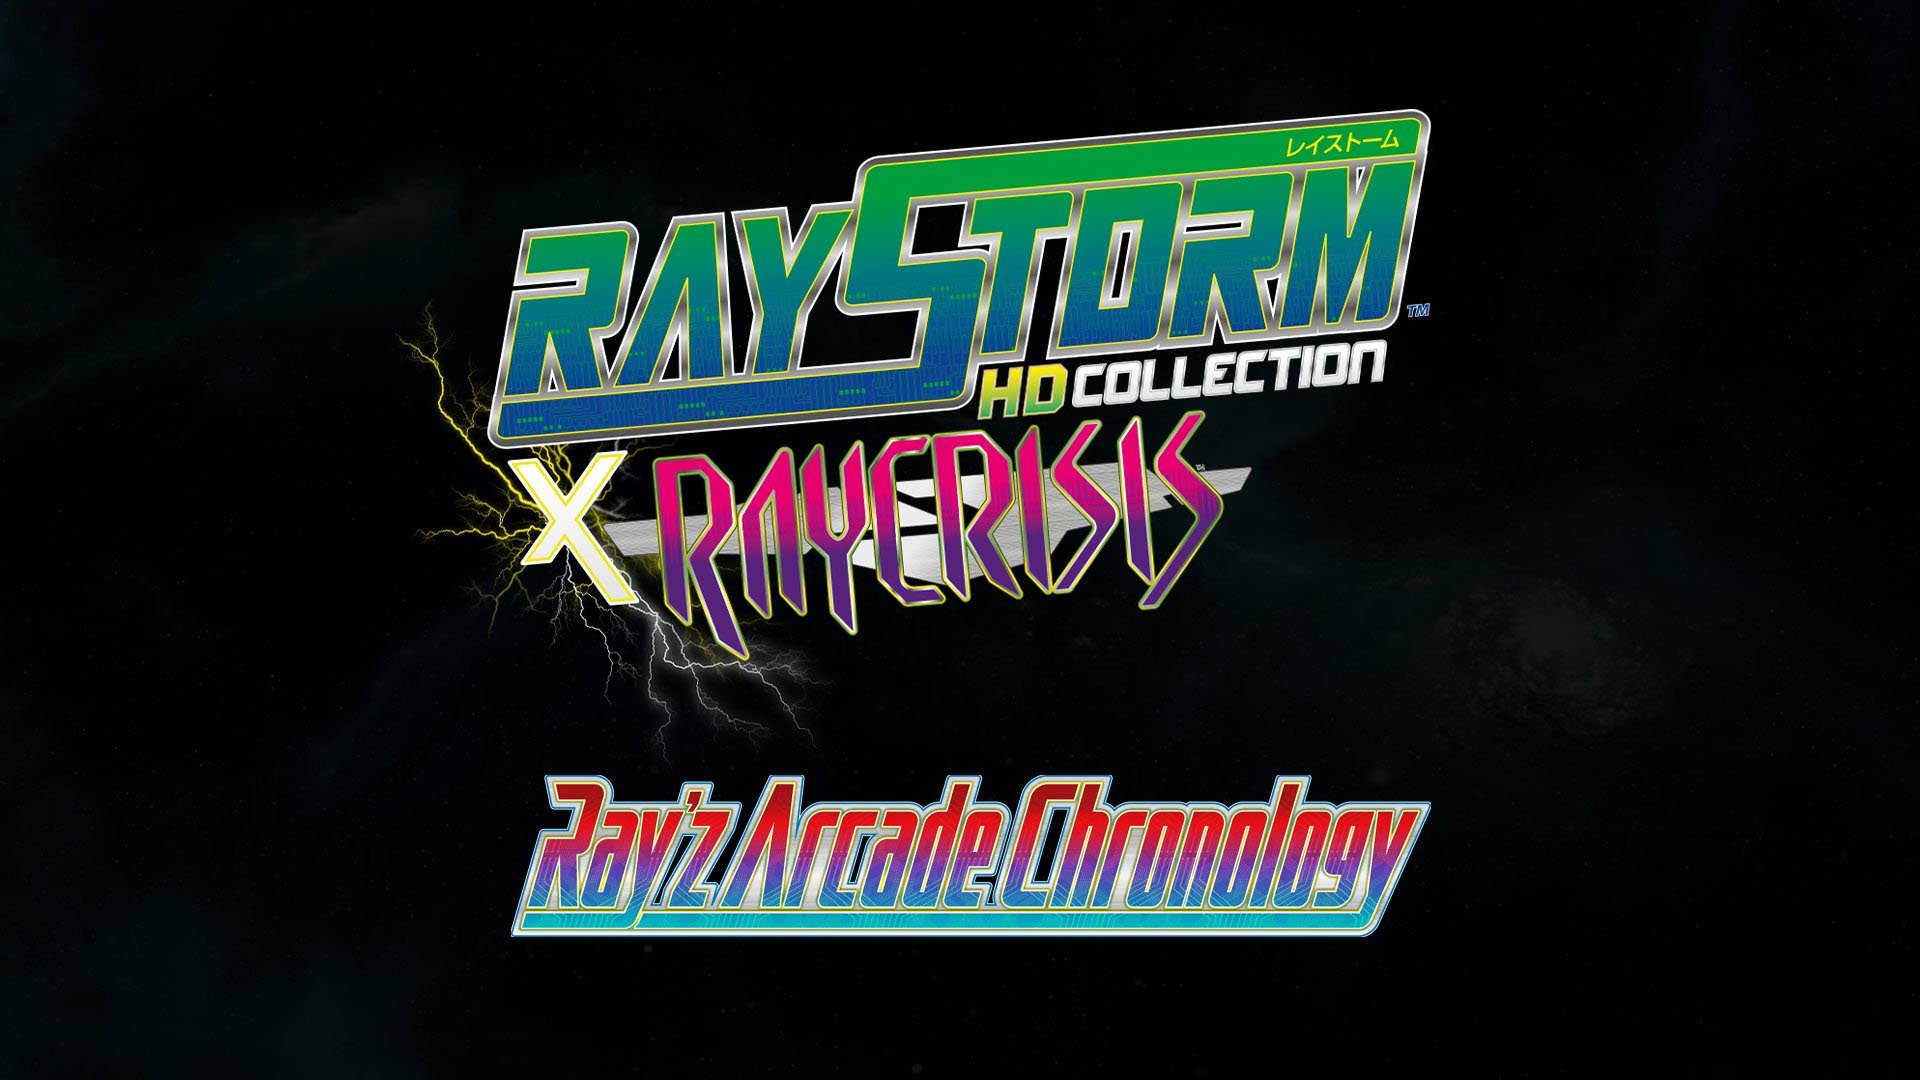 #
      Ray’z Arcade Chronology and RayStorm x RayCrisis HD Collection coming west